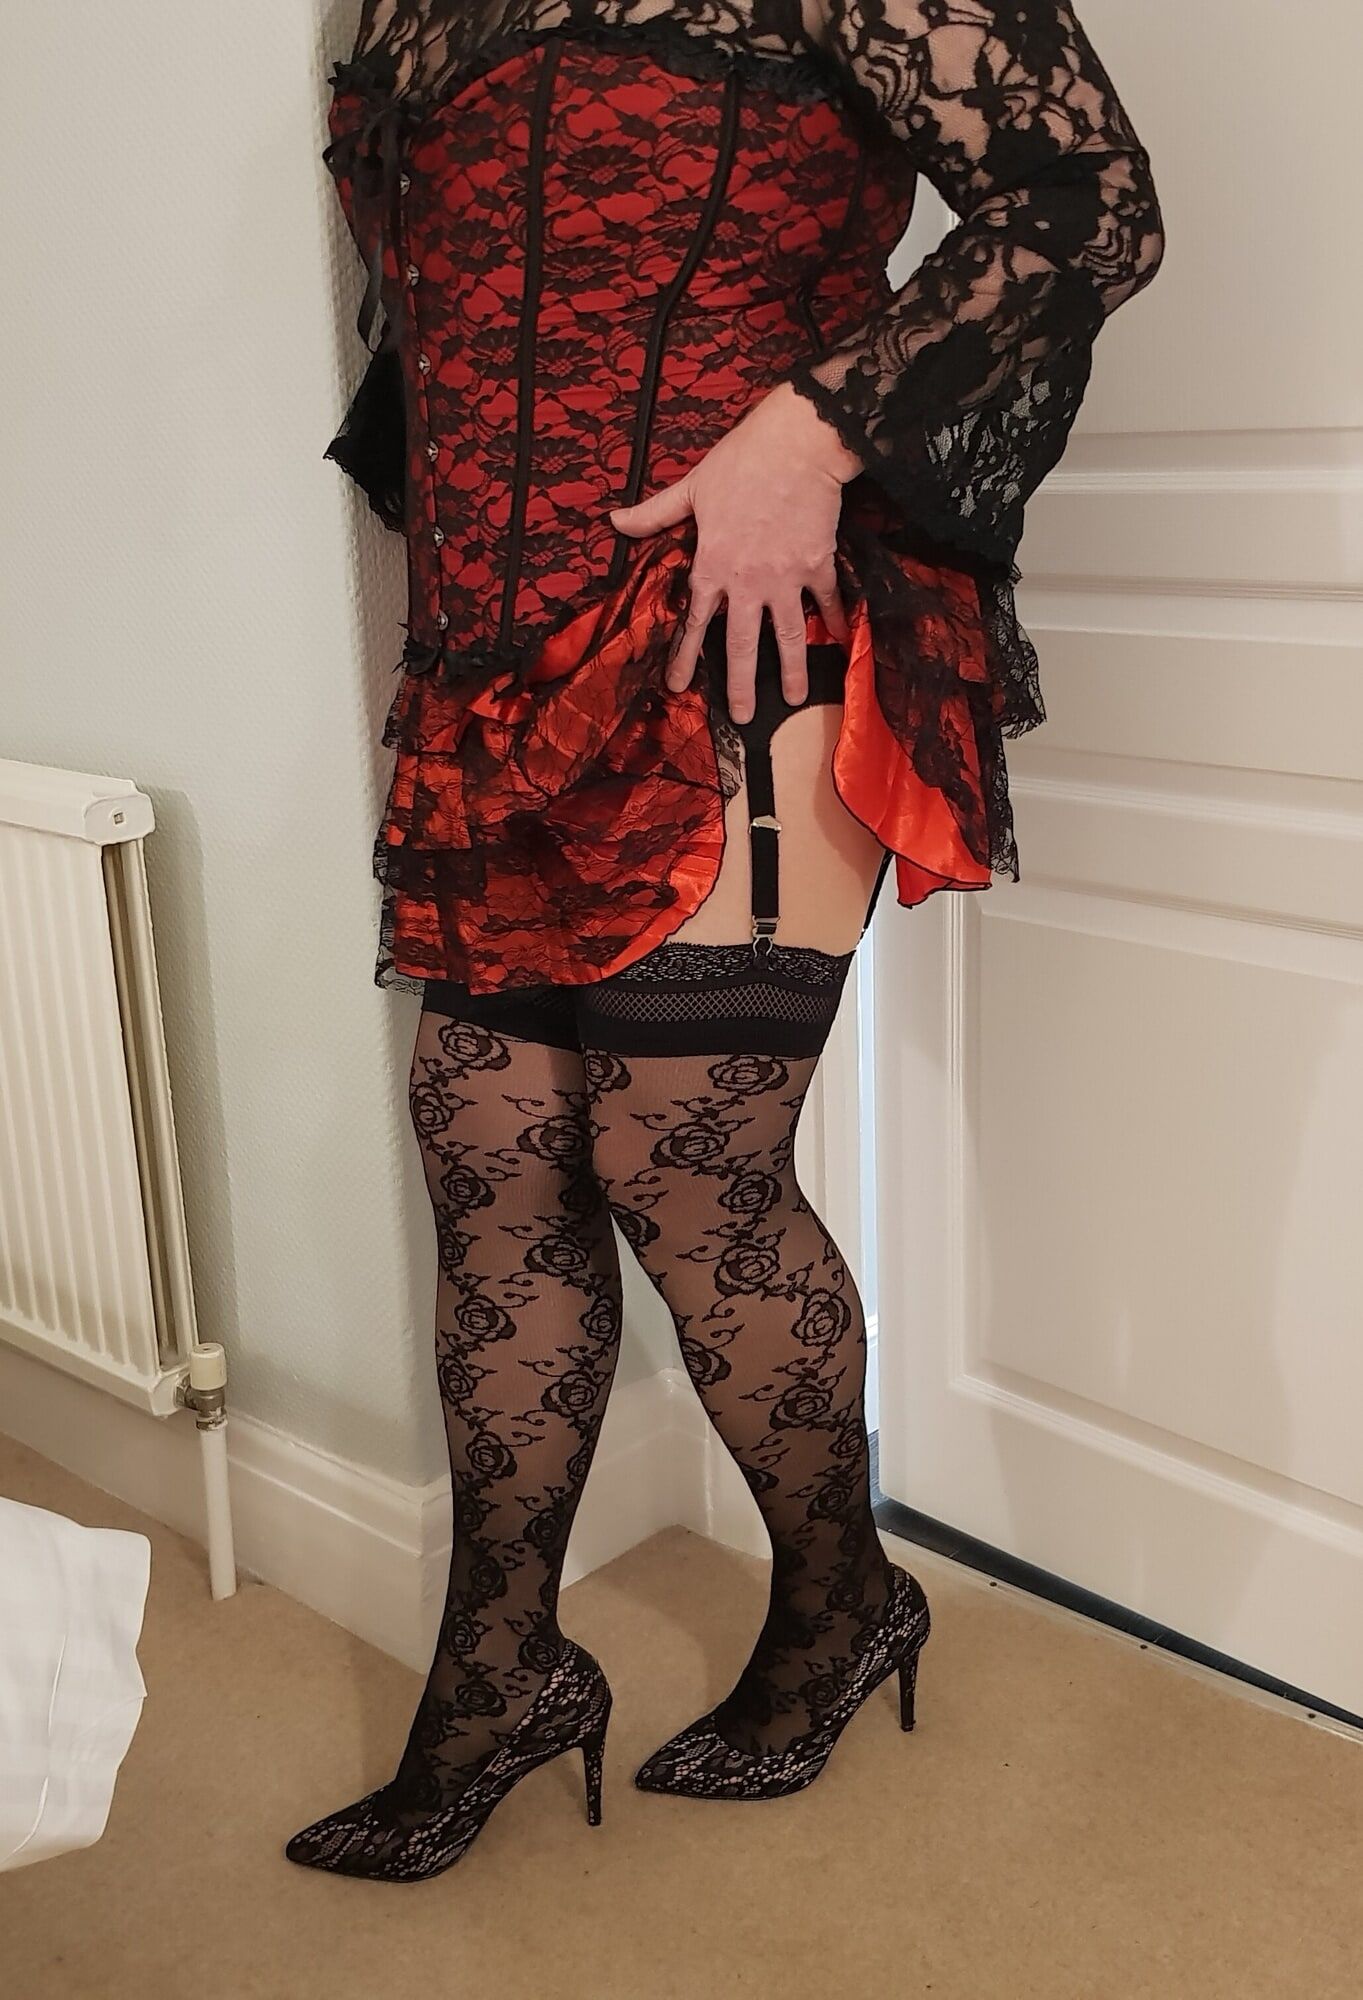 Crossdressing in floral lace lingerie, skirt and heels #4